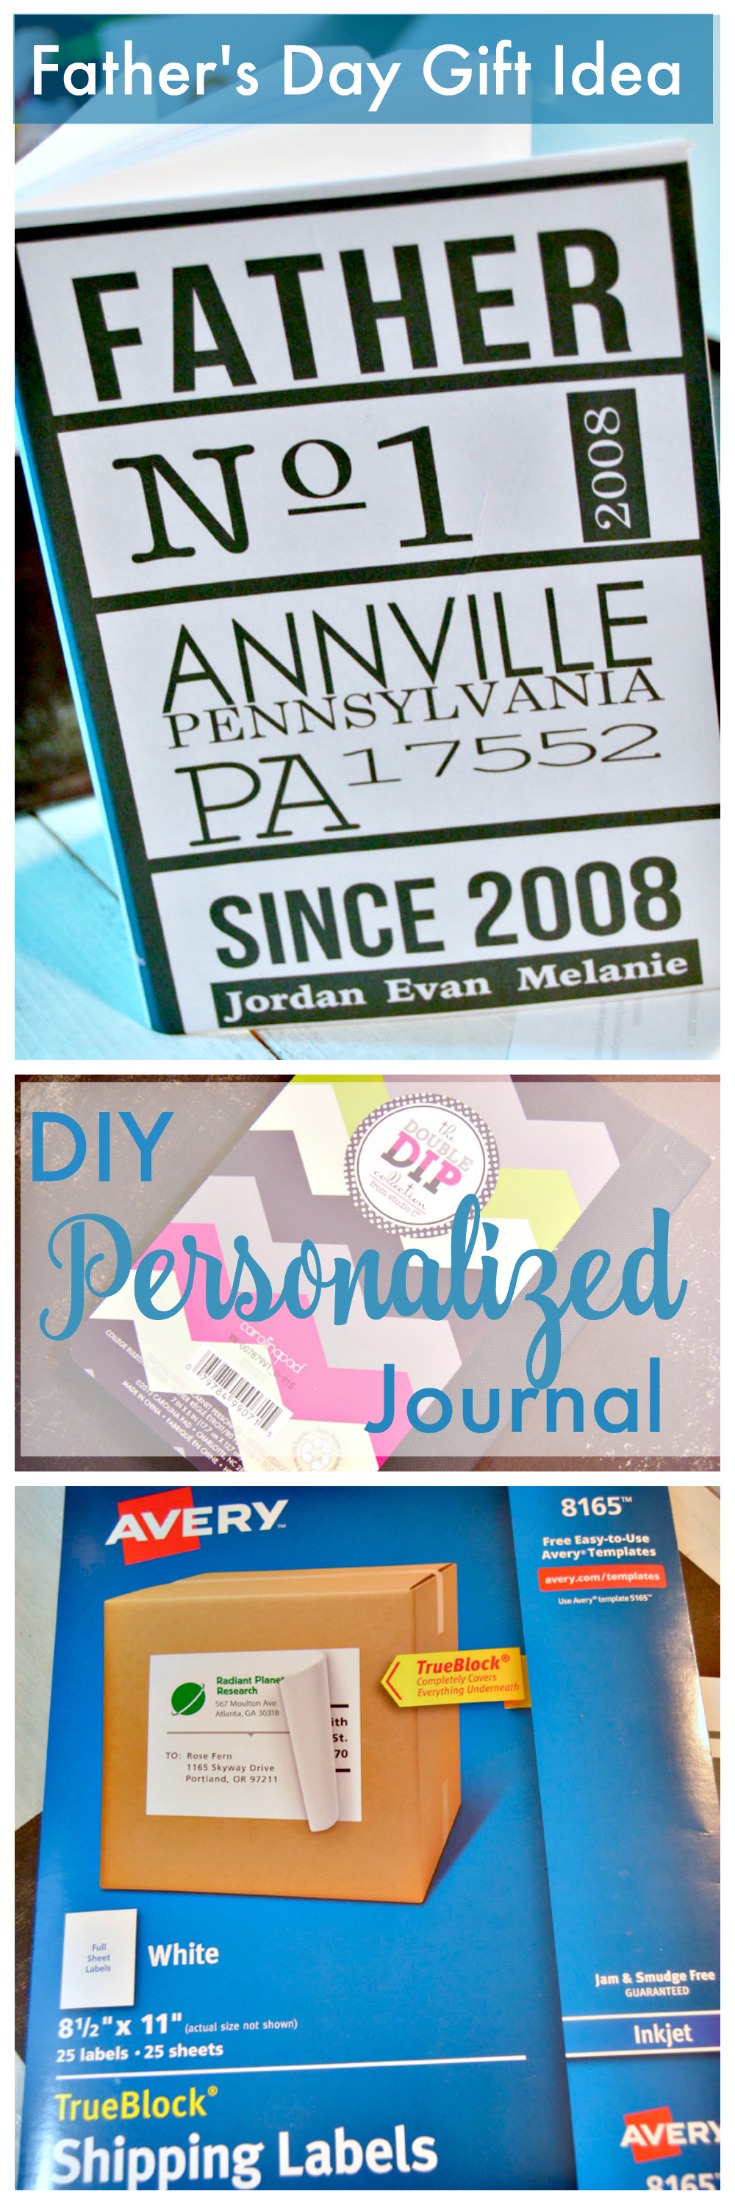 How to make a personalized journal for Father's Day